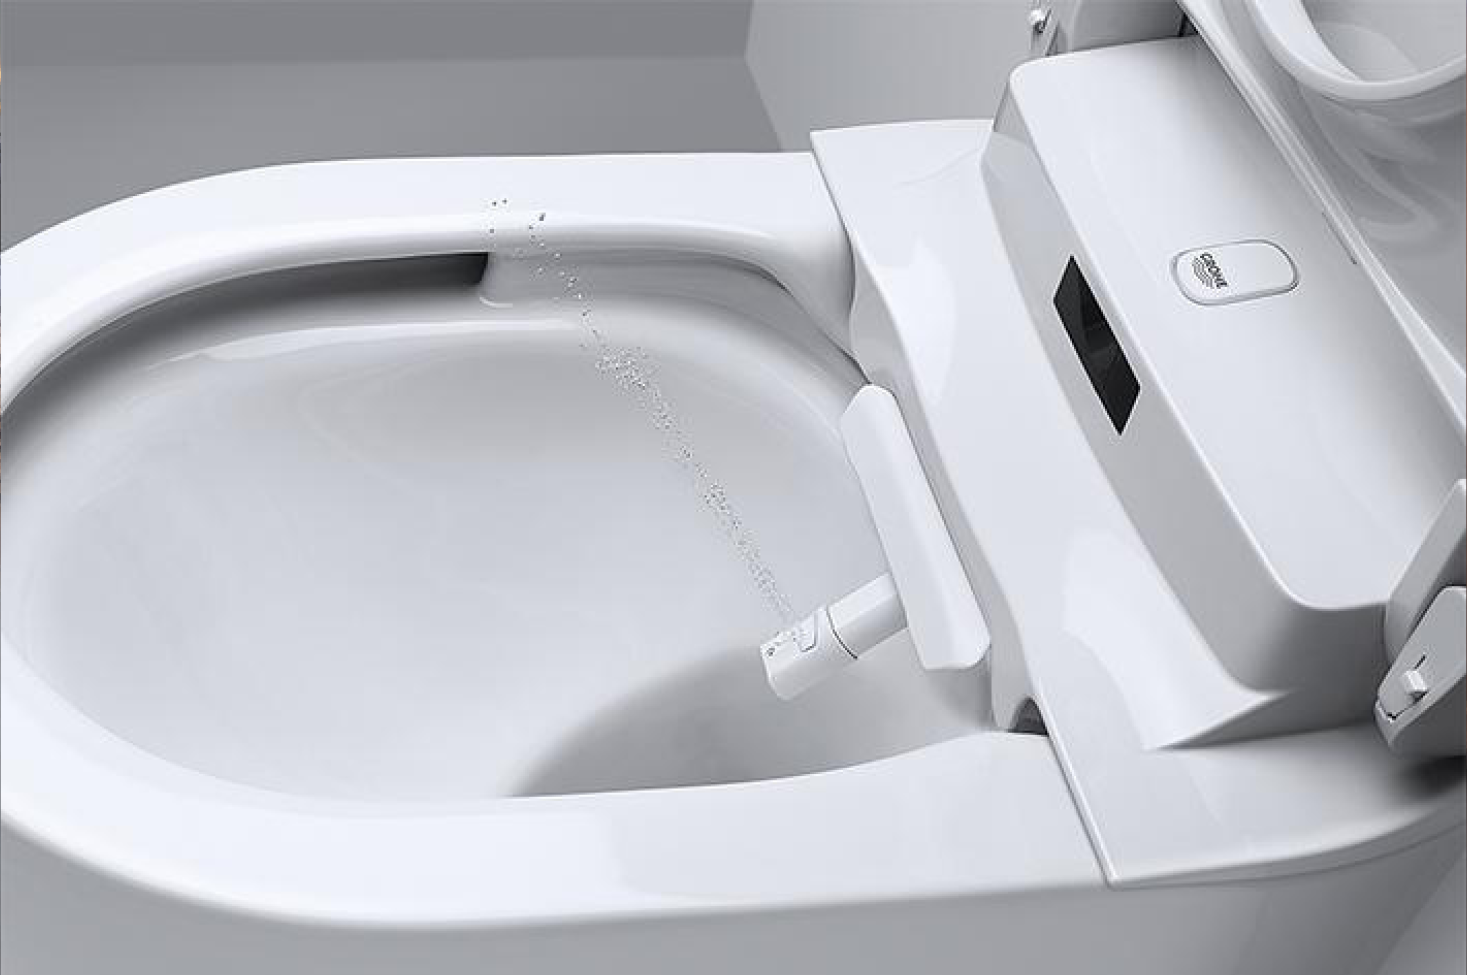 Grohe douche wc